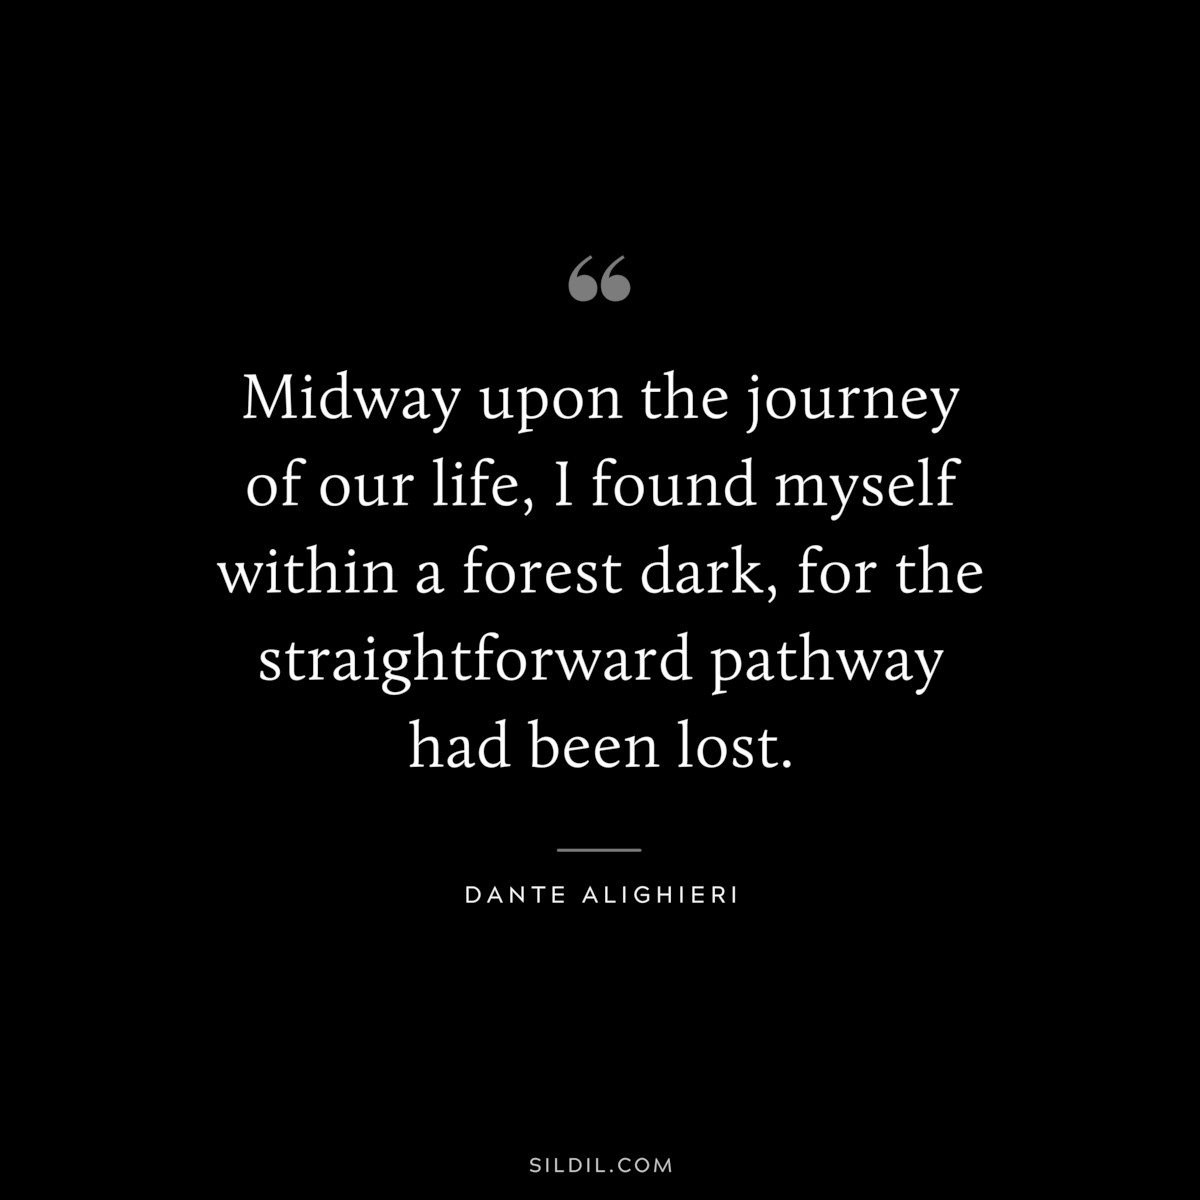 Midway upon the journey of our life, I found myself within a forest dark, for the straightforward pathway had been lost. ― Dante Alighieri